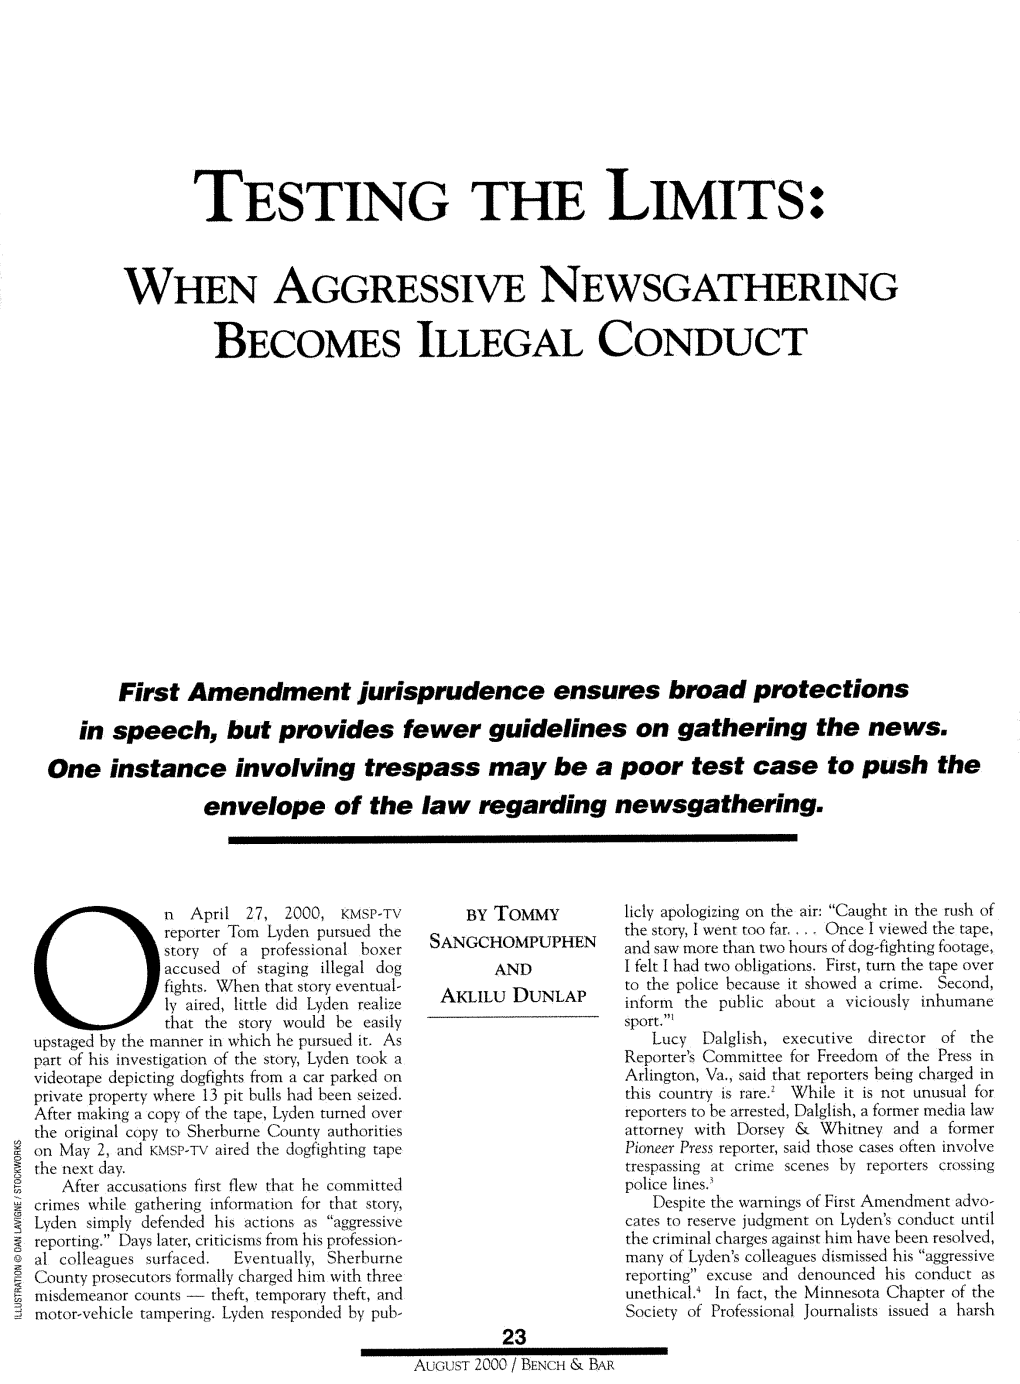 Testing the Limits: When Aggressive Newsgathering Becomes Illegal Conduct